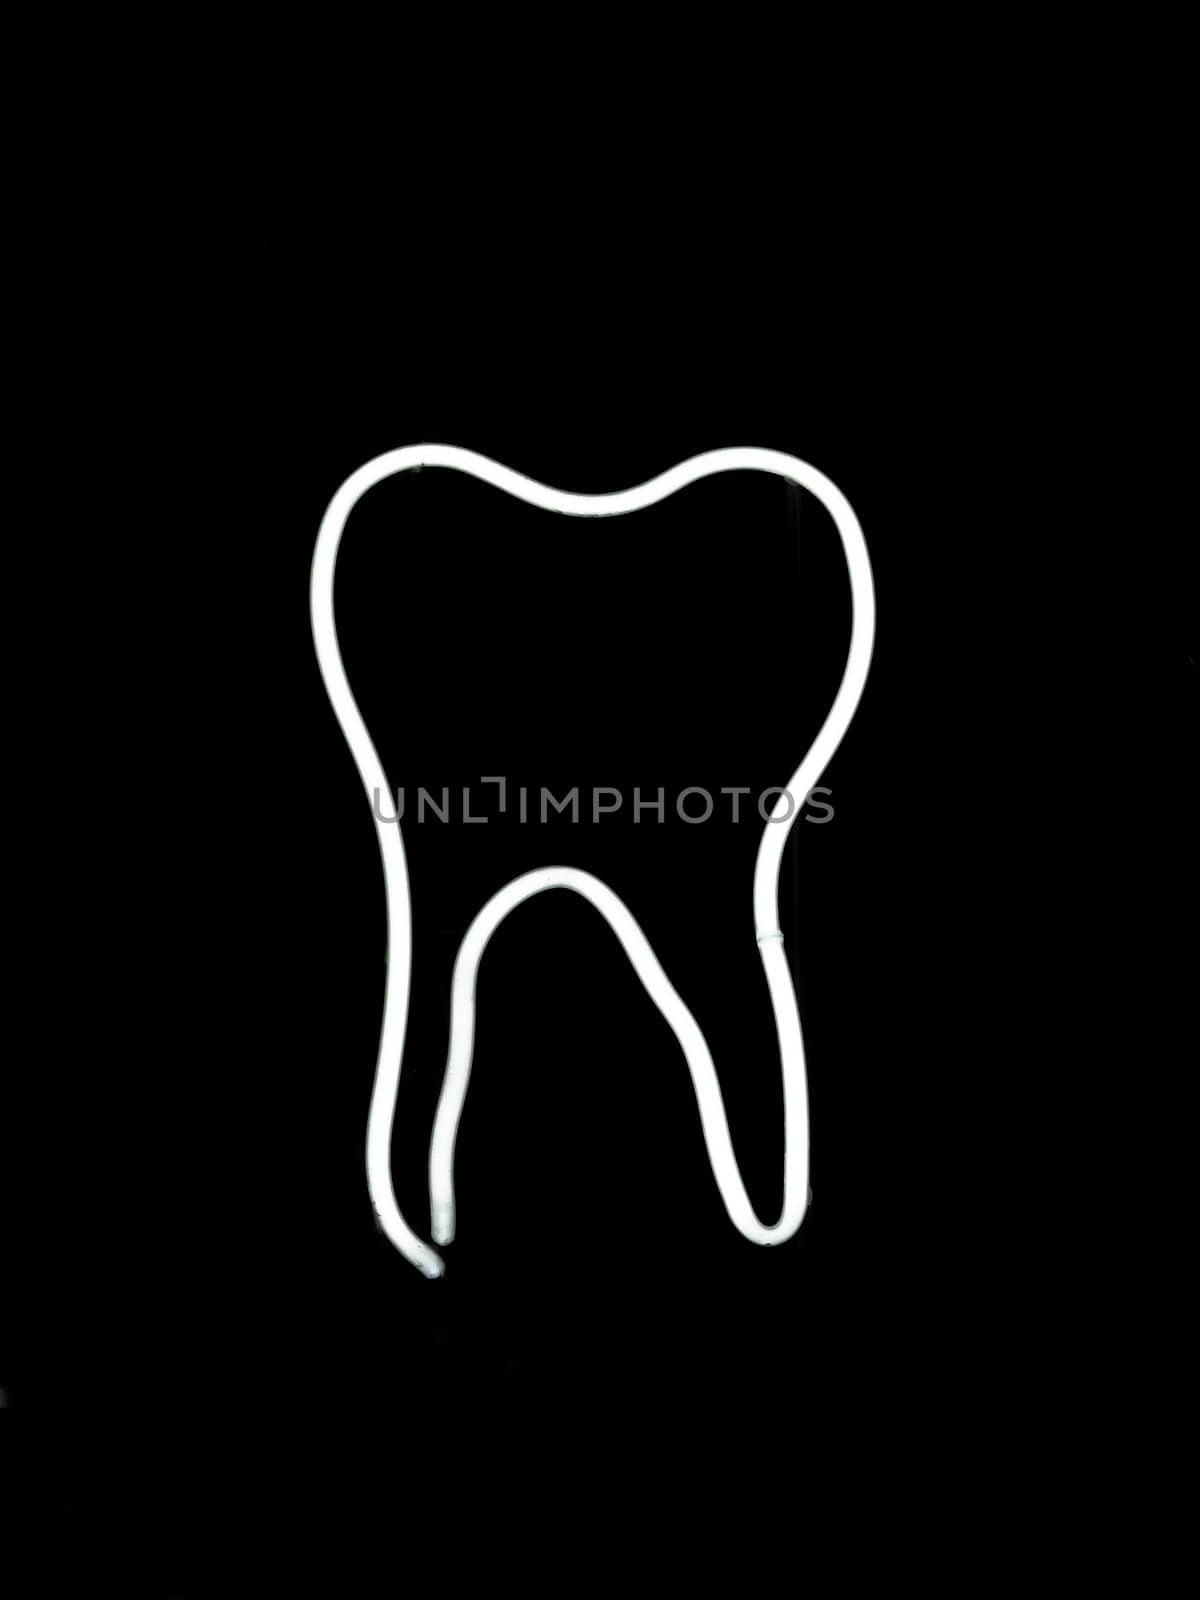 Neon tooth shaped sign by ADavis